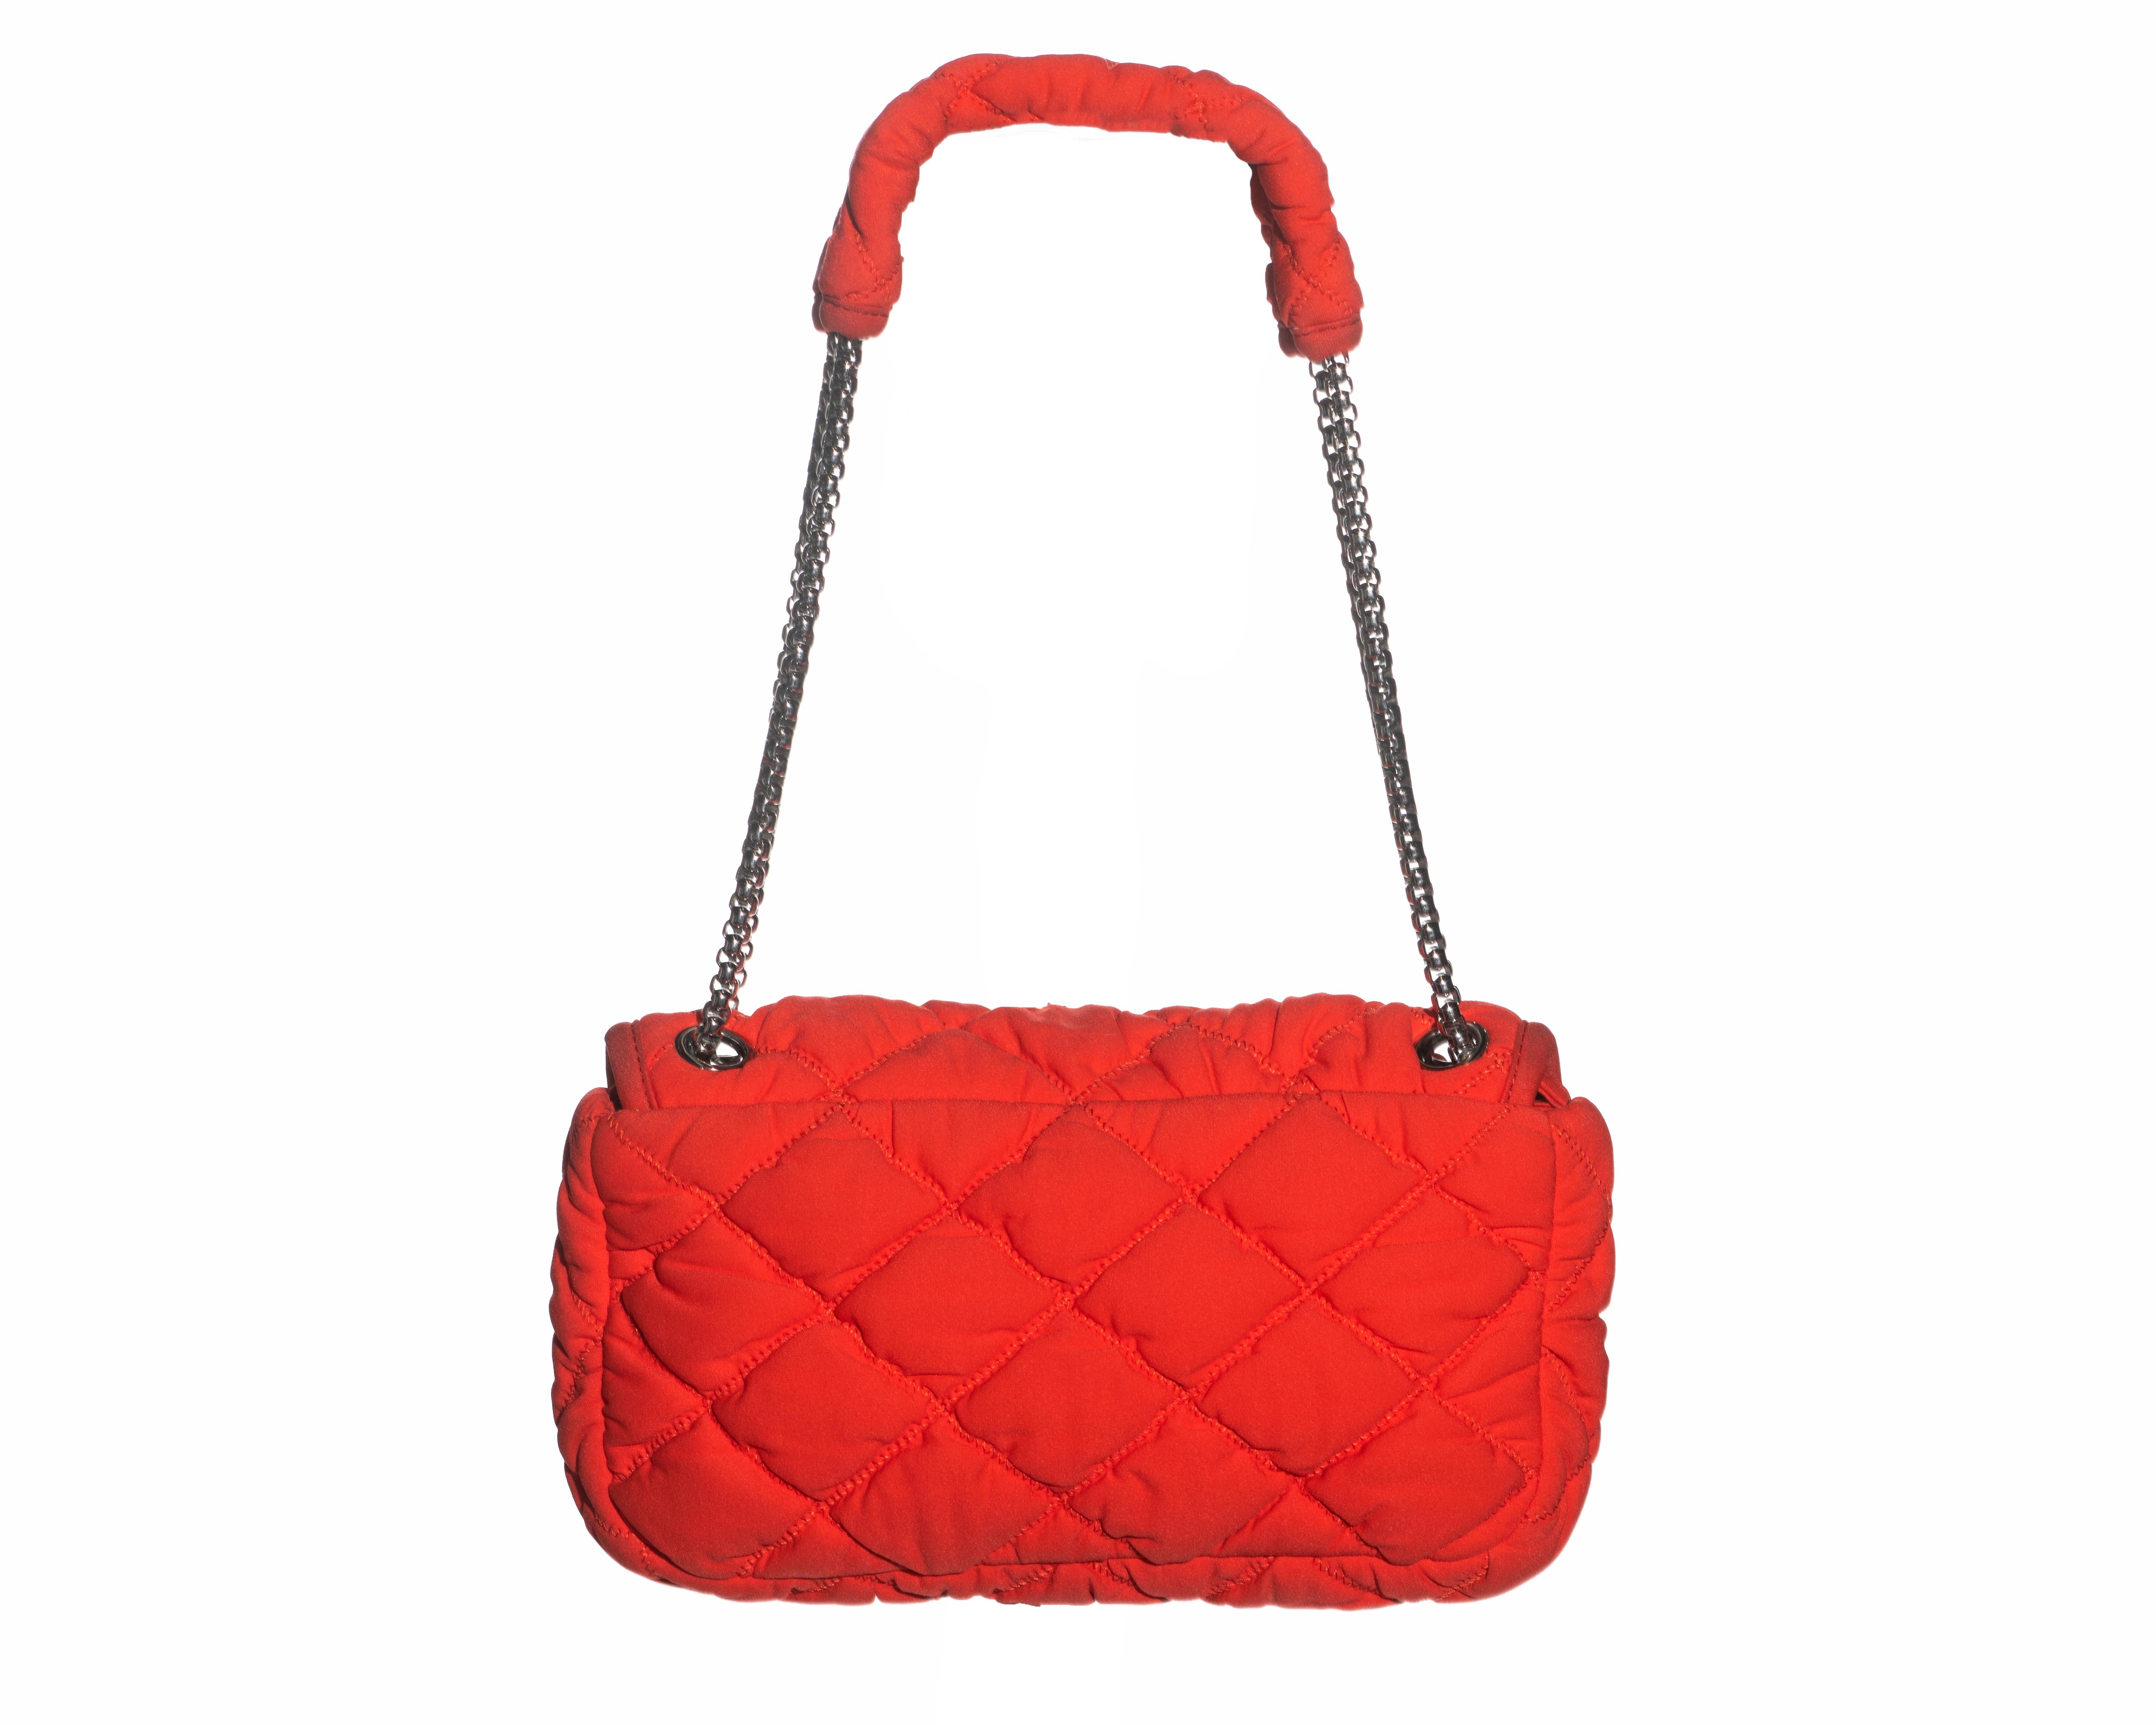 Chanel orange nylon bubble quilted flap bag with silver hardware, c. 2008 1